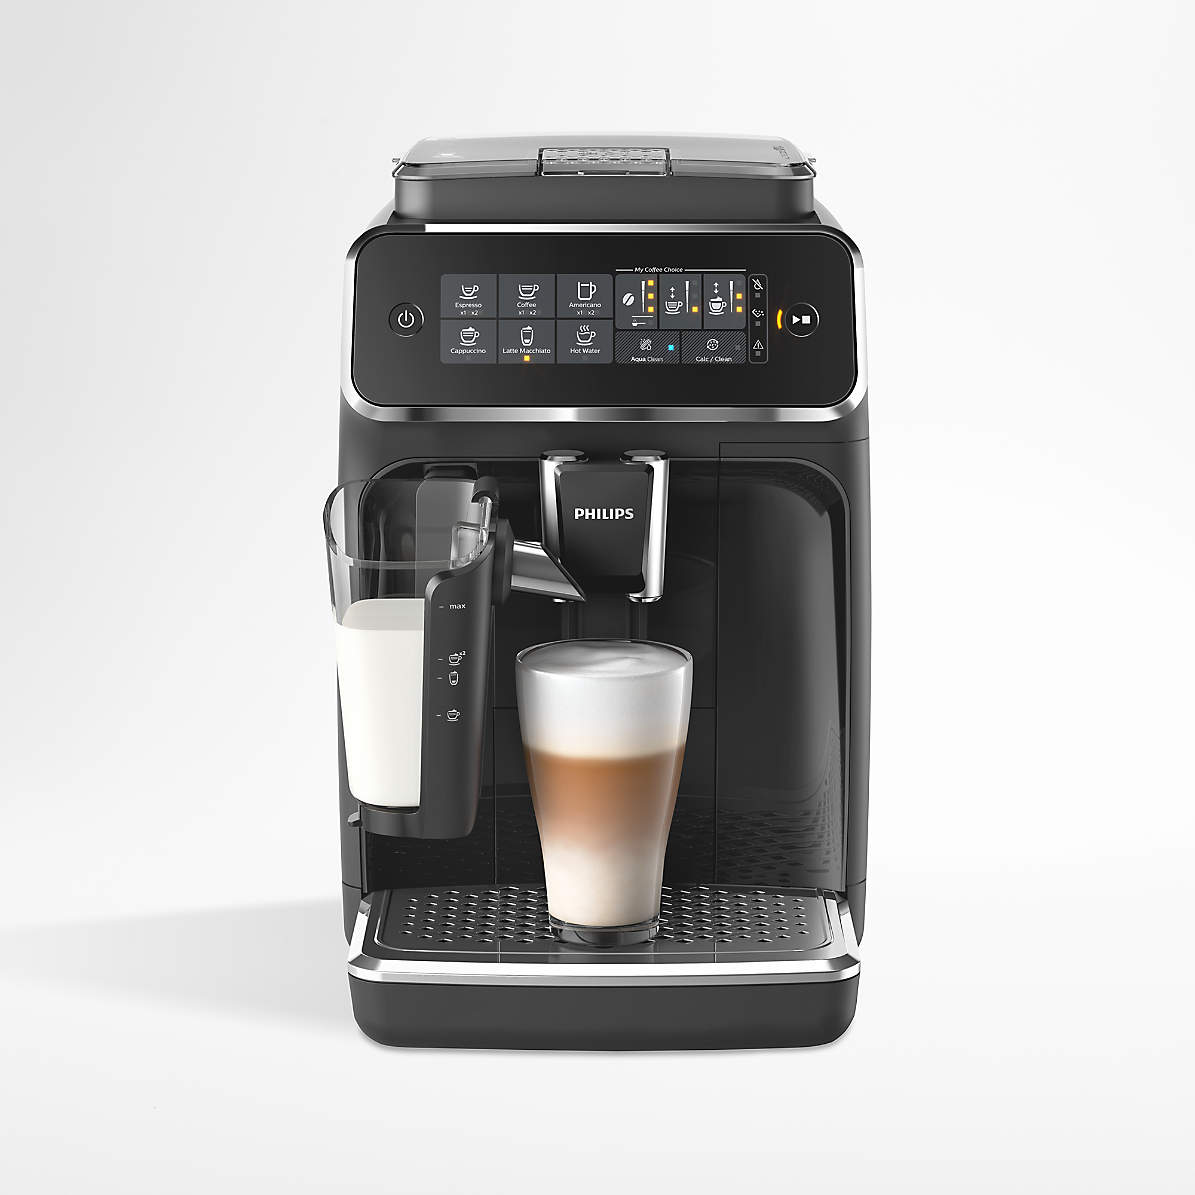 Philips 3200 Series Fully Automatic Espresso Machine with Milk Frother + Reviews | Crate & Barrel